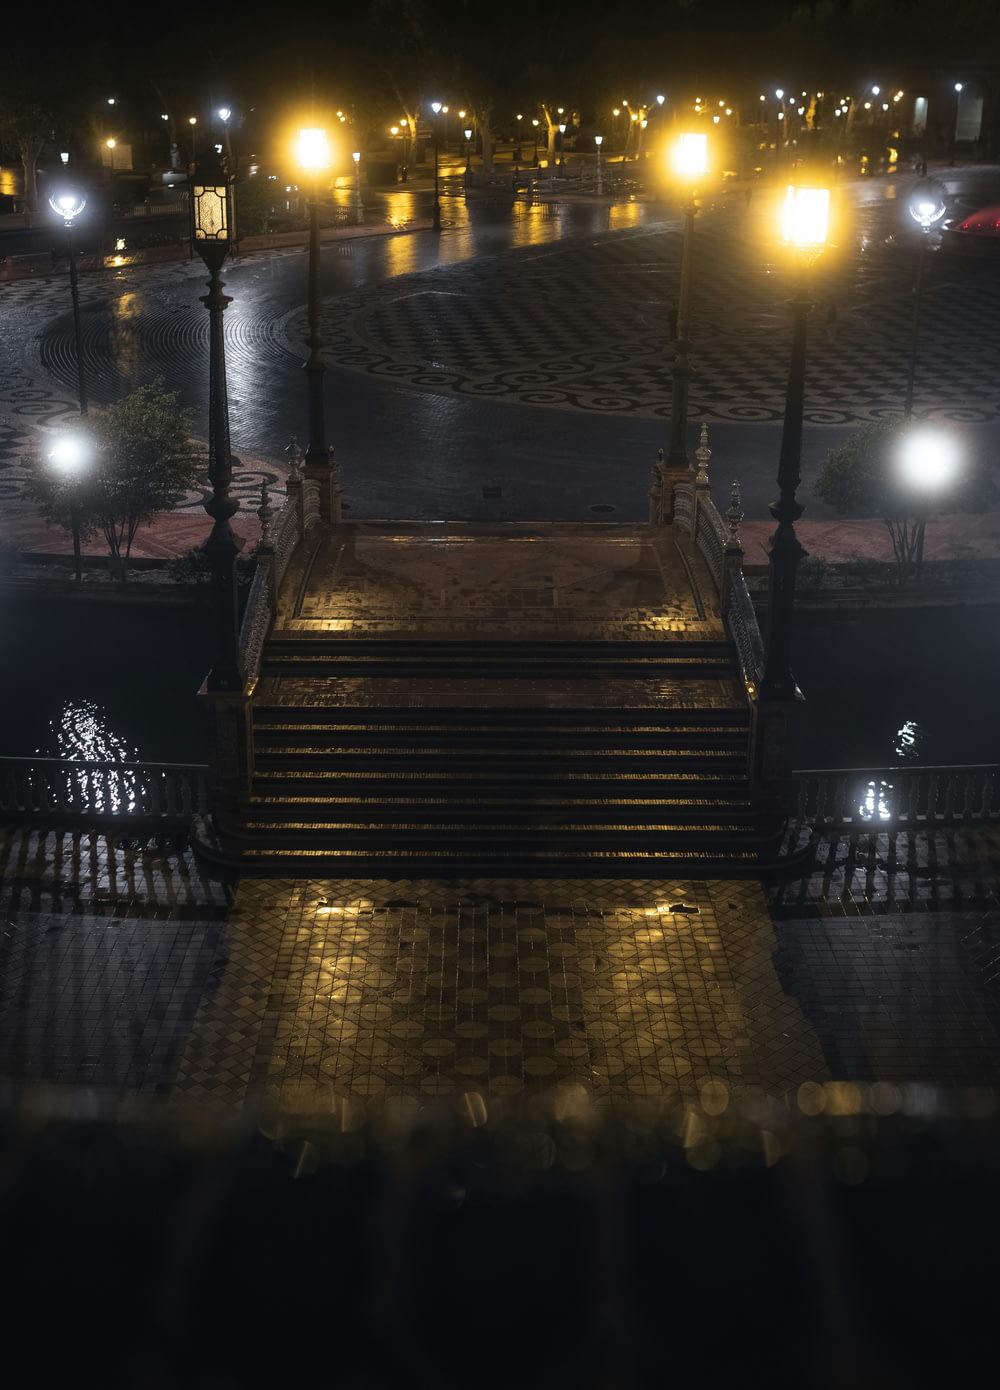 a set of steps with lights on at night